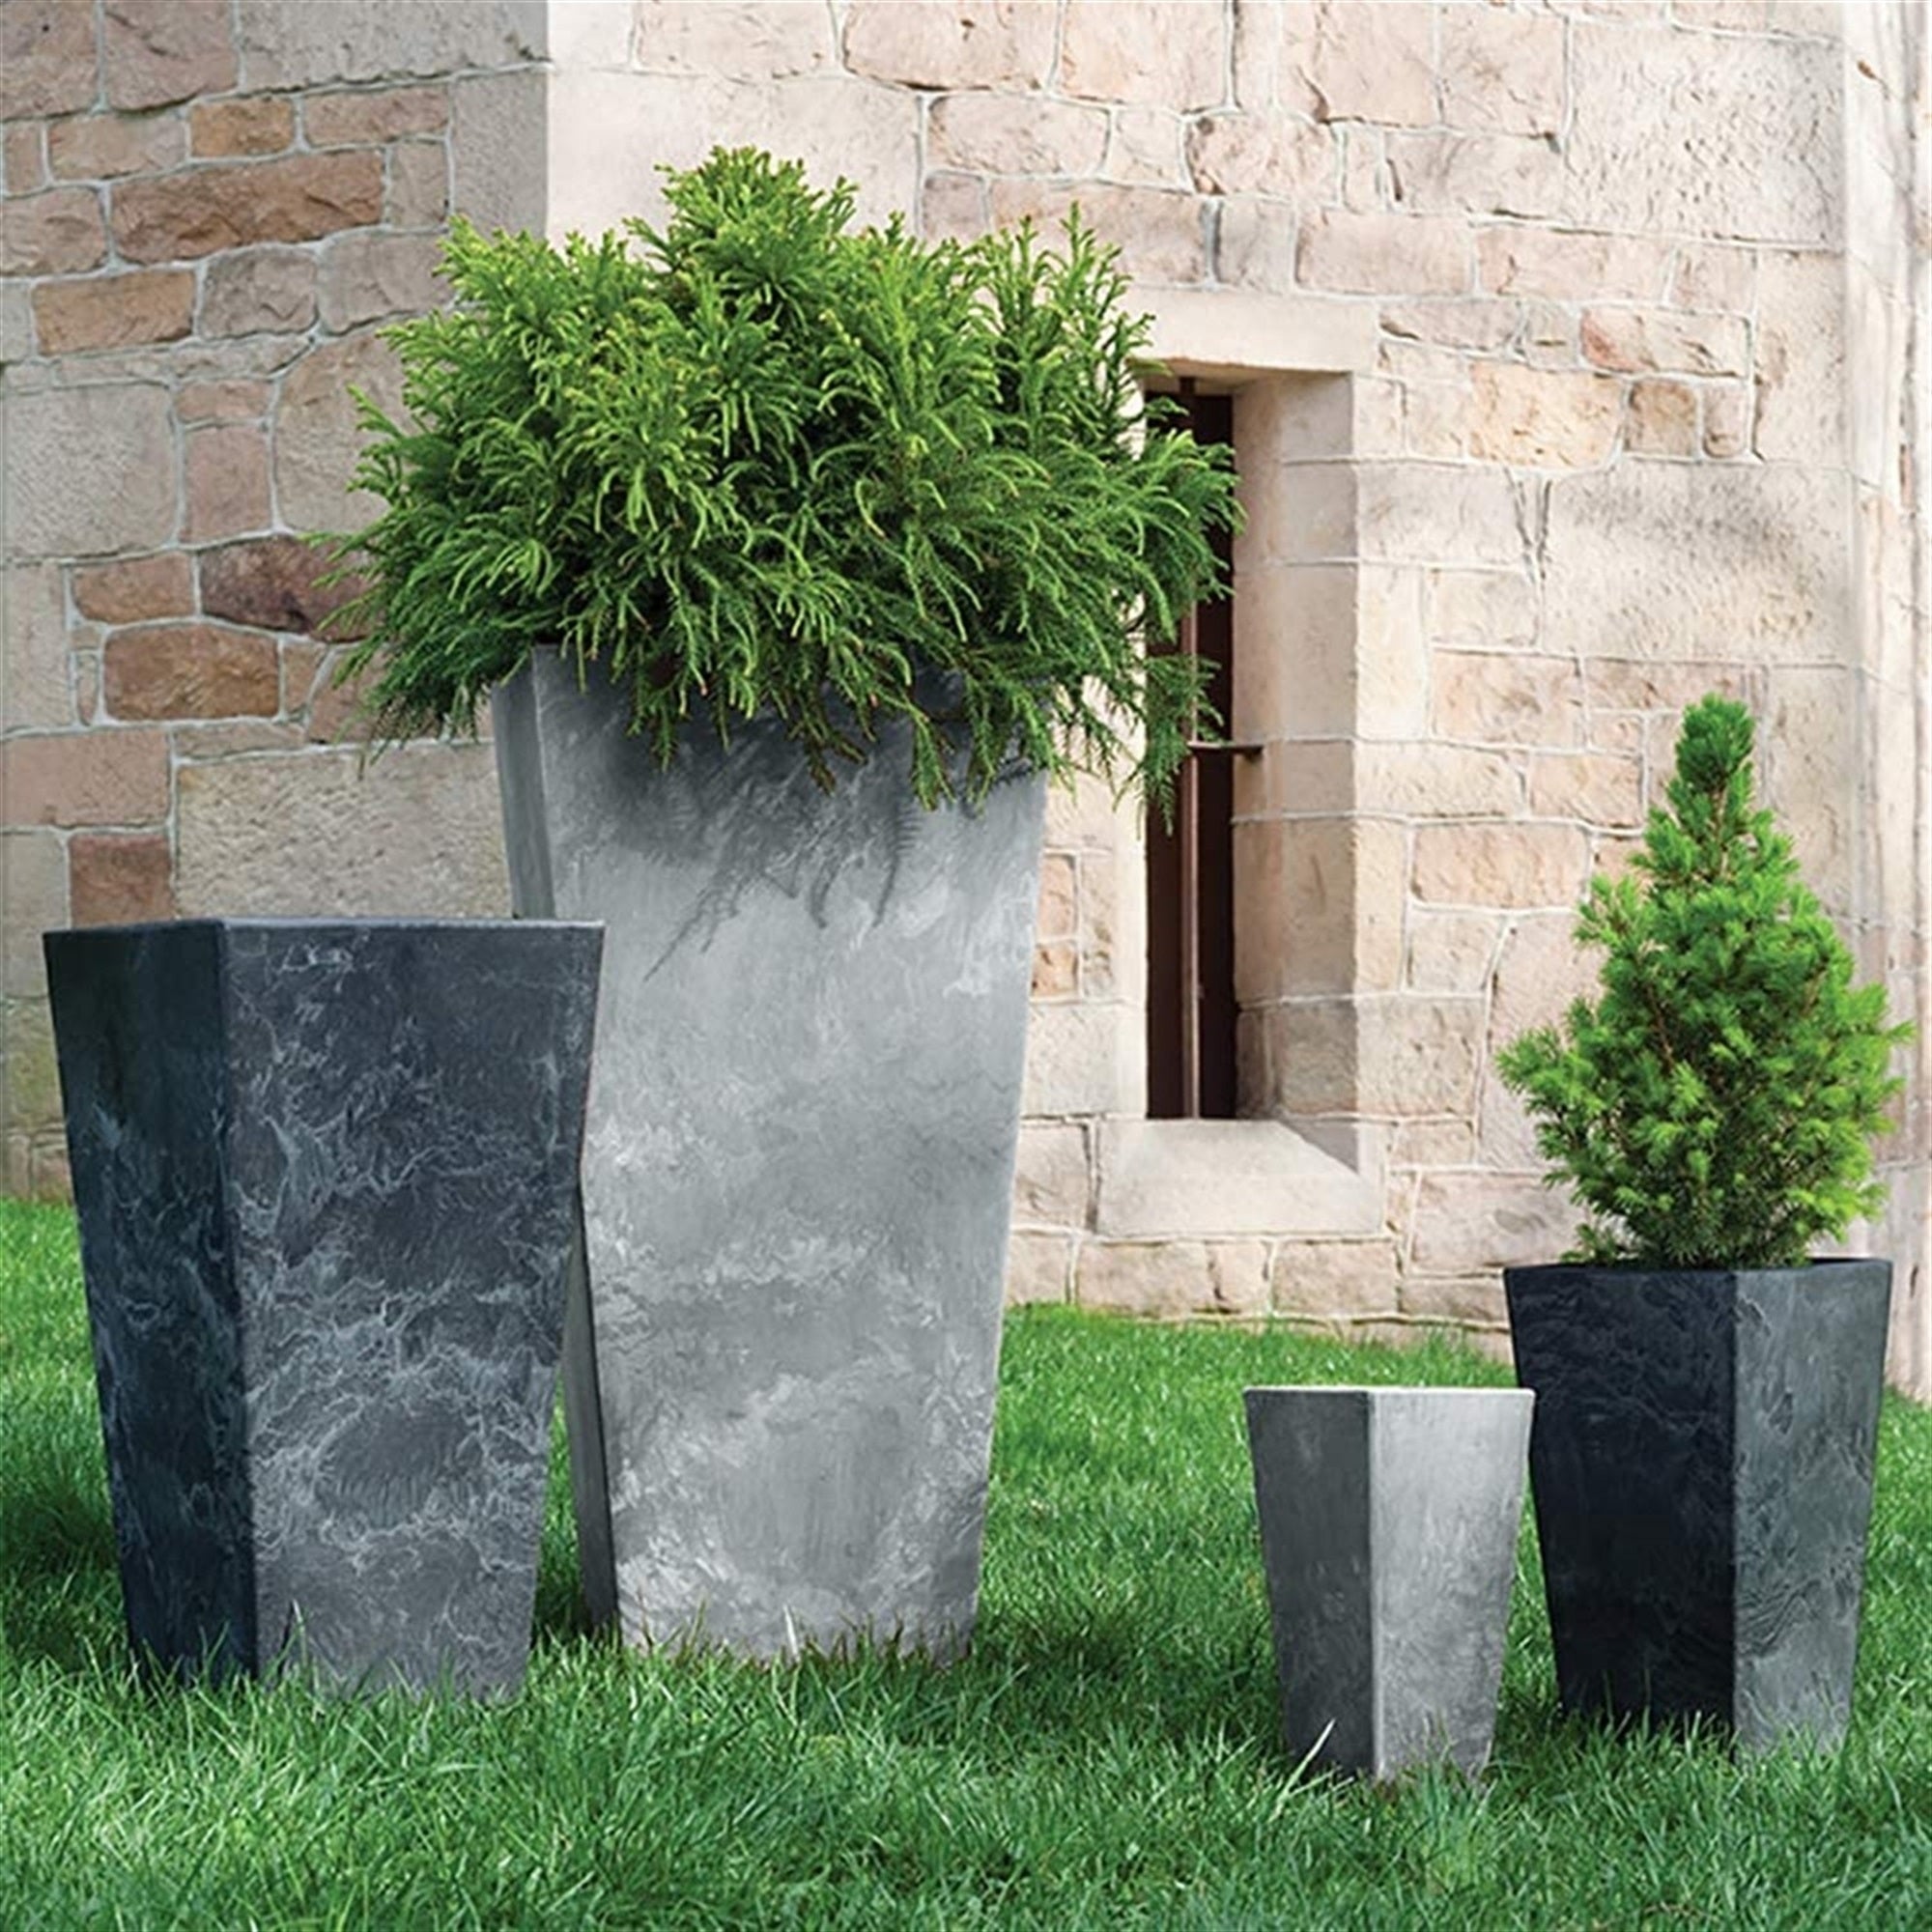 Novelty Artstone Tall Square Ella Planters with Self Watering System